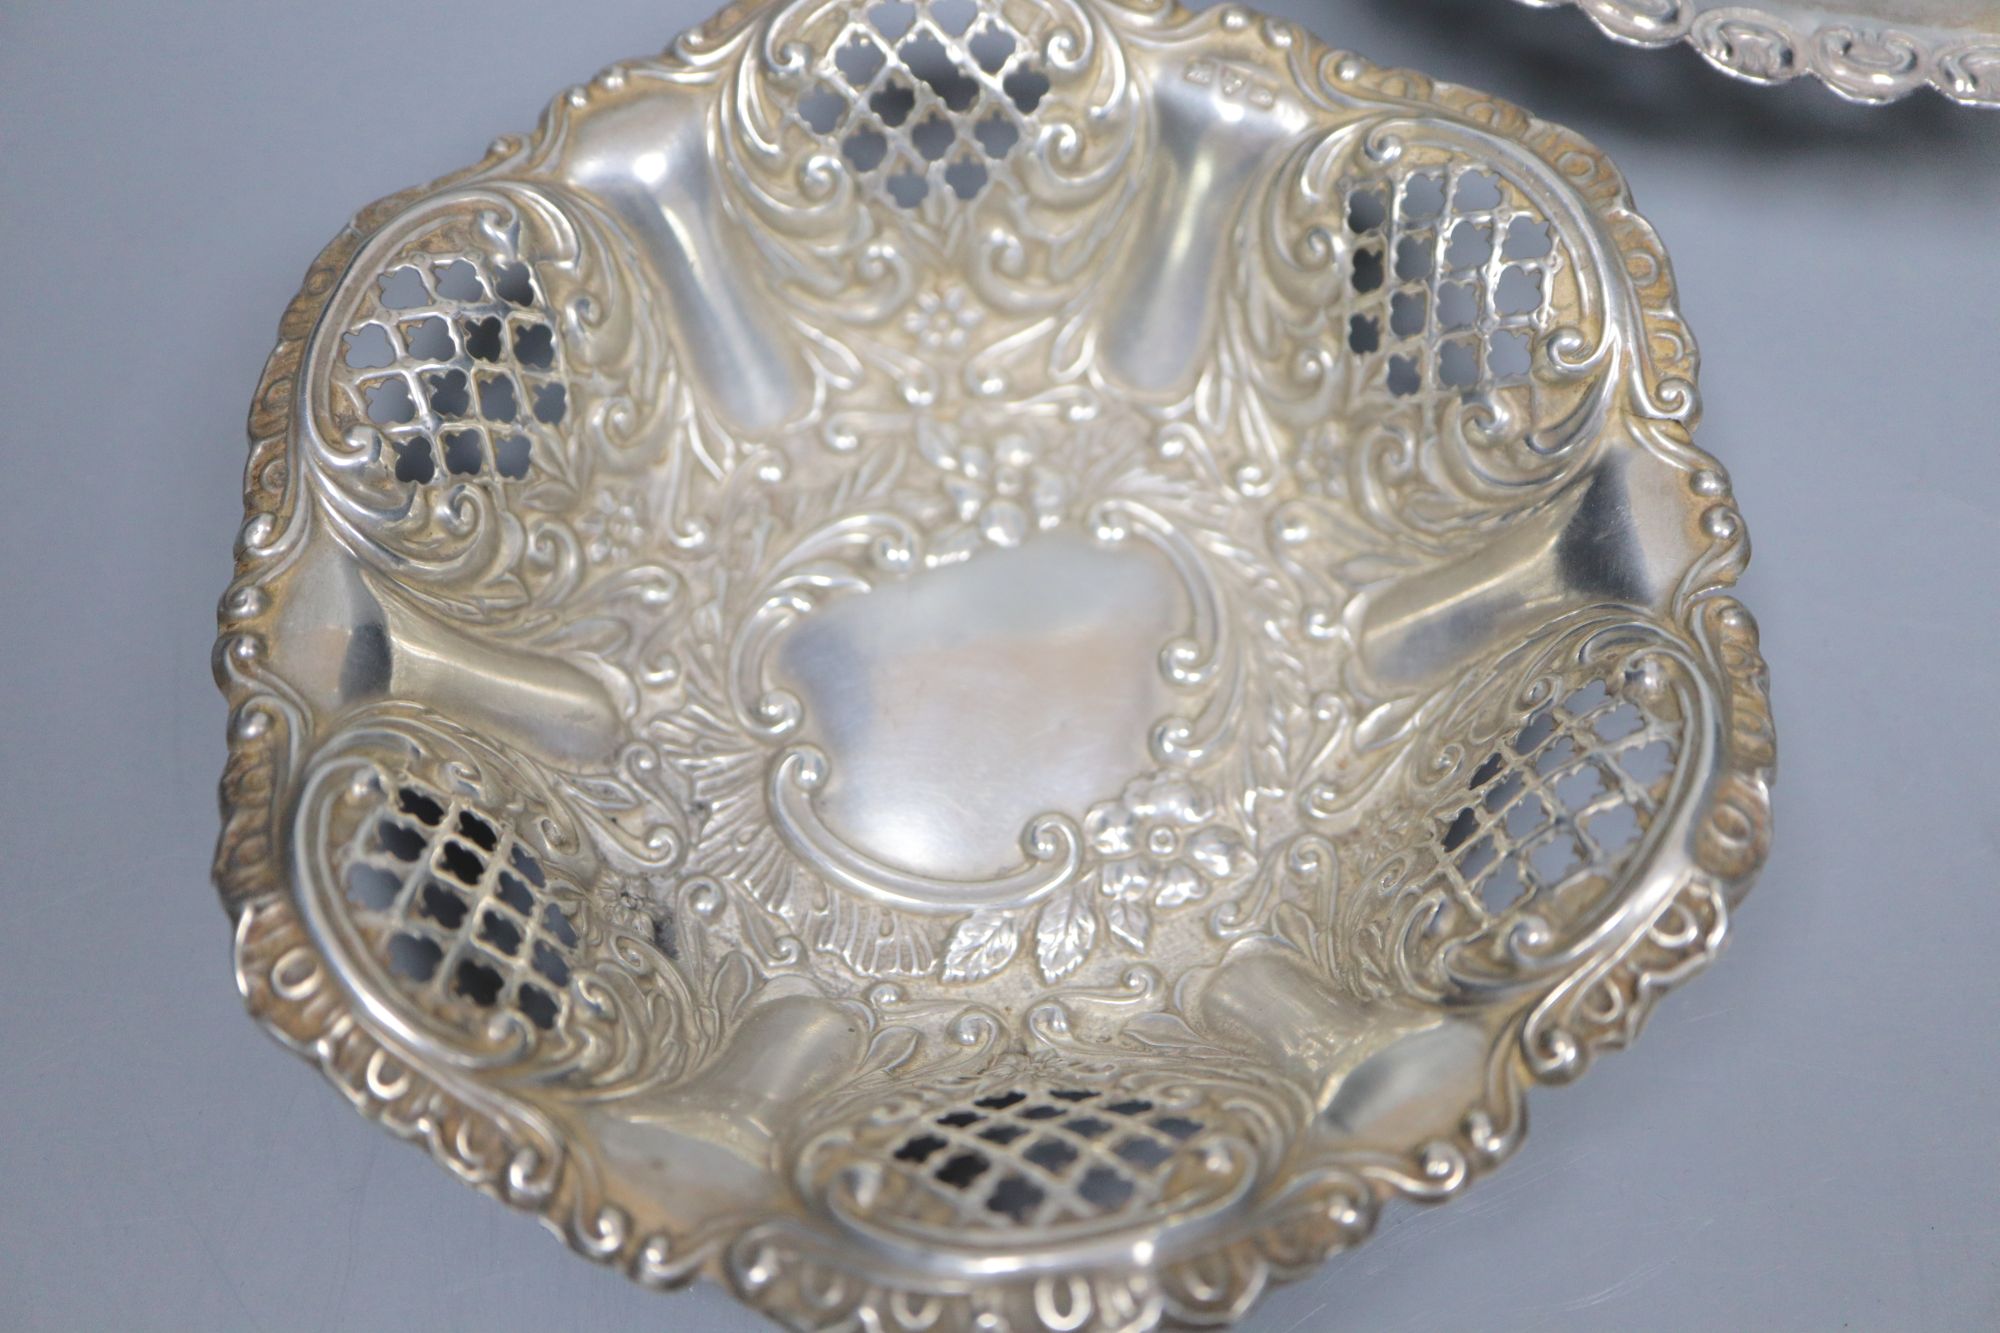 A late Victorian repousse silver bon bon dish and two similar Edwardian dishes, largest 16.8cm, 159 grams.